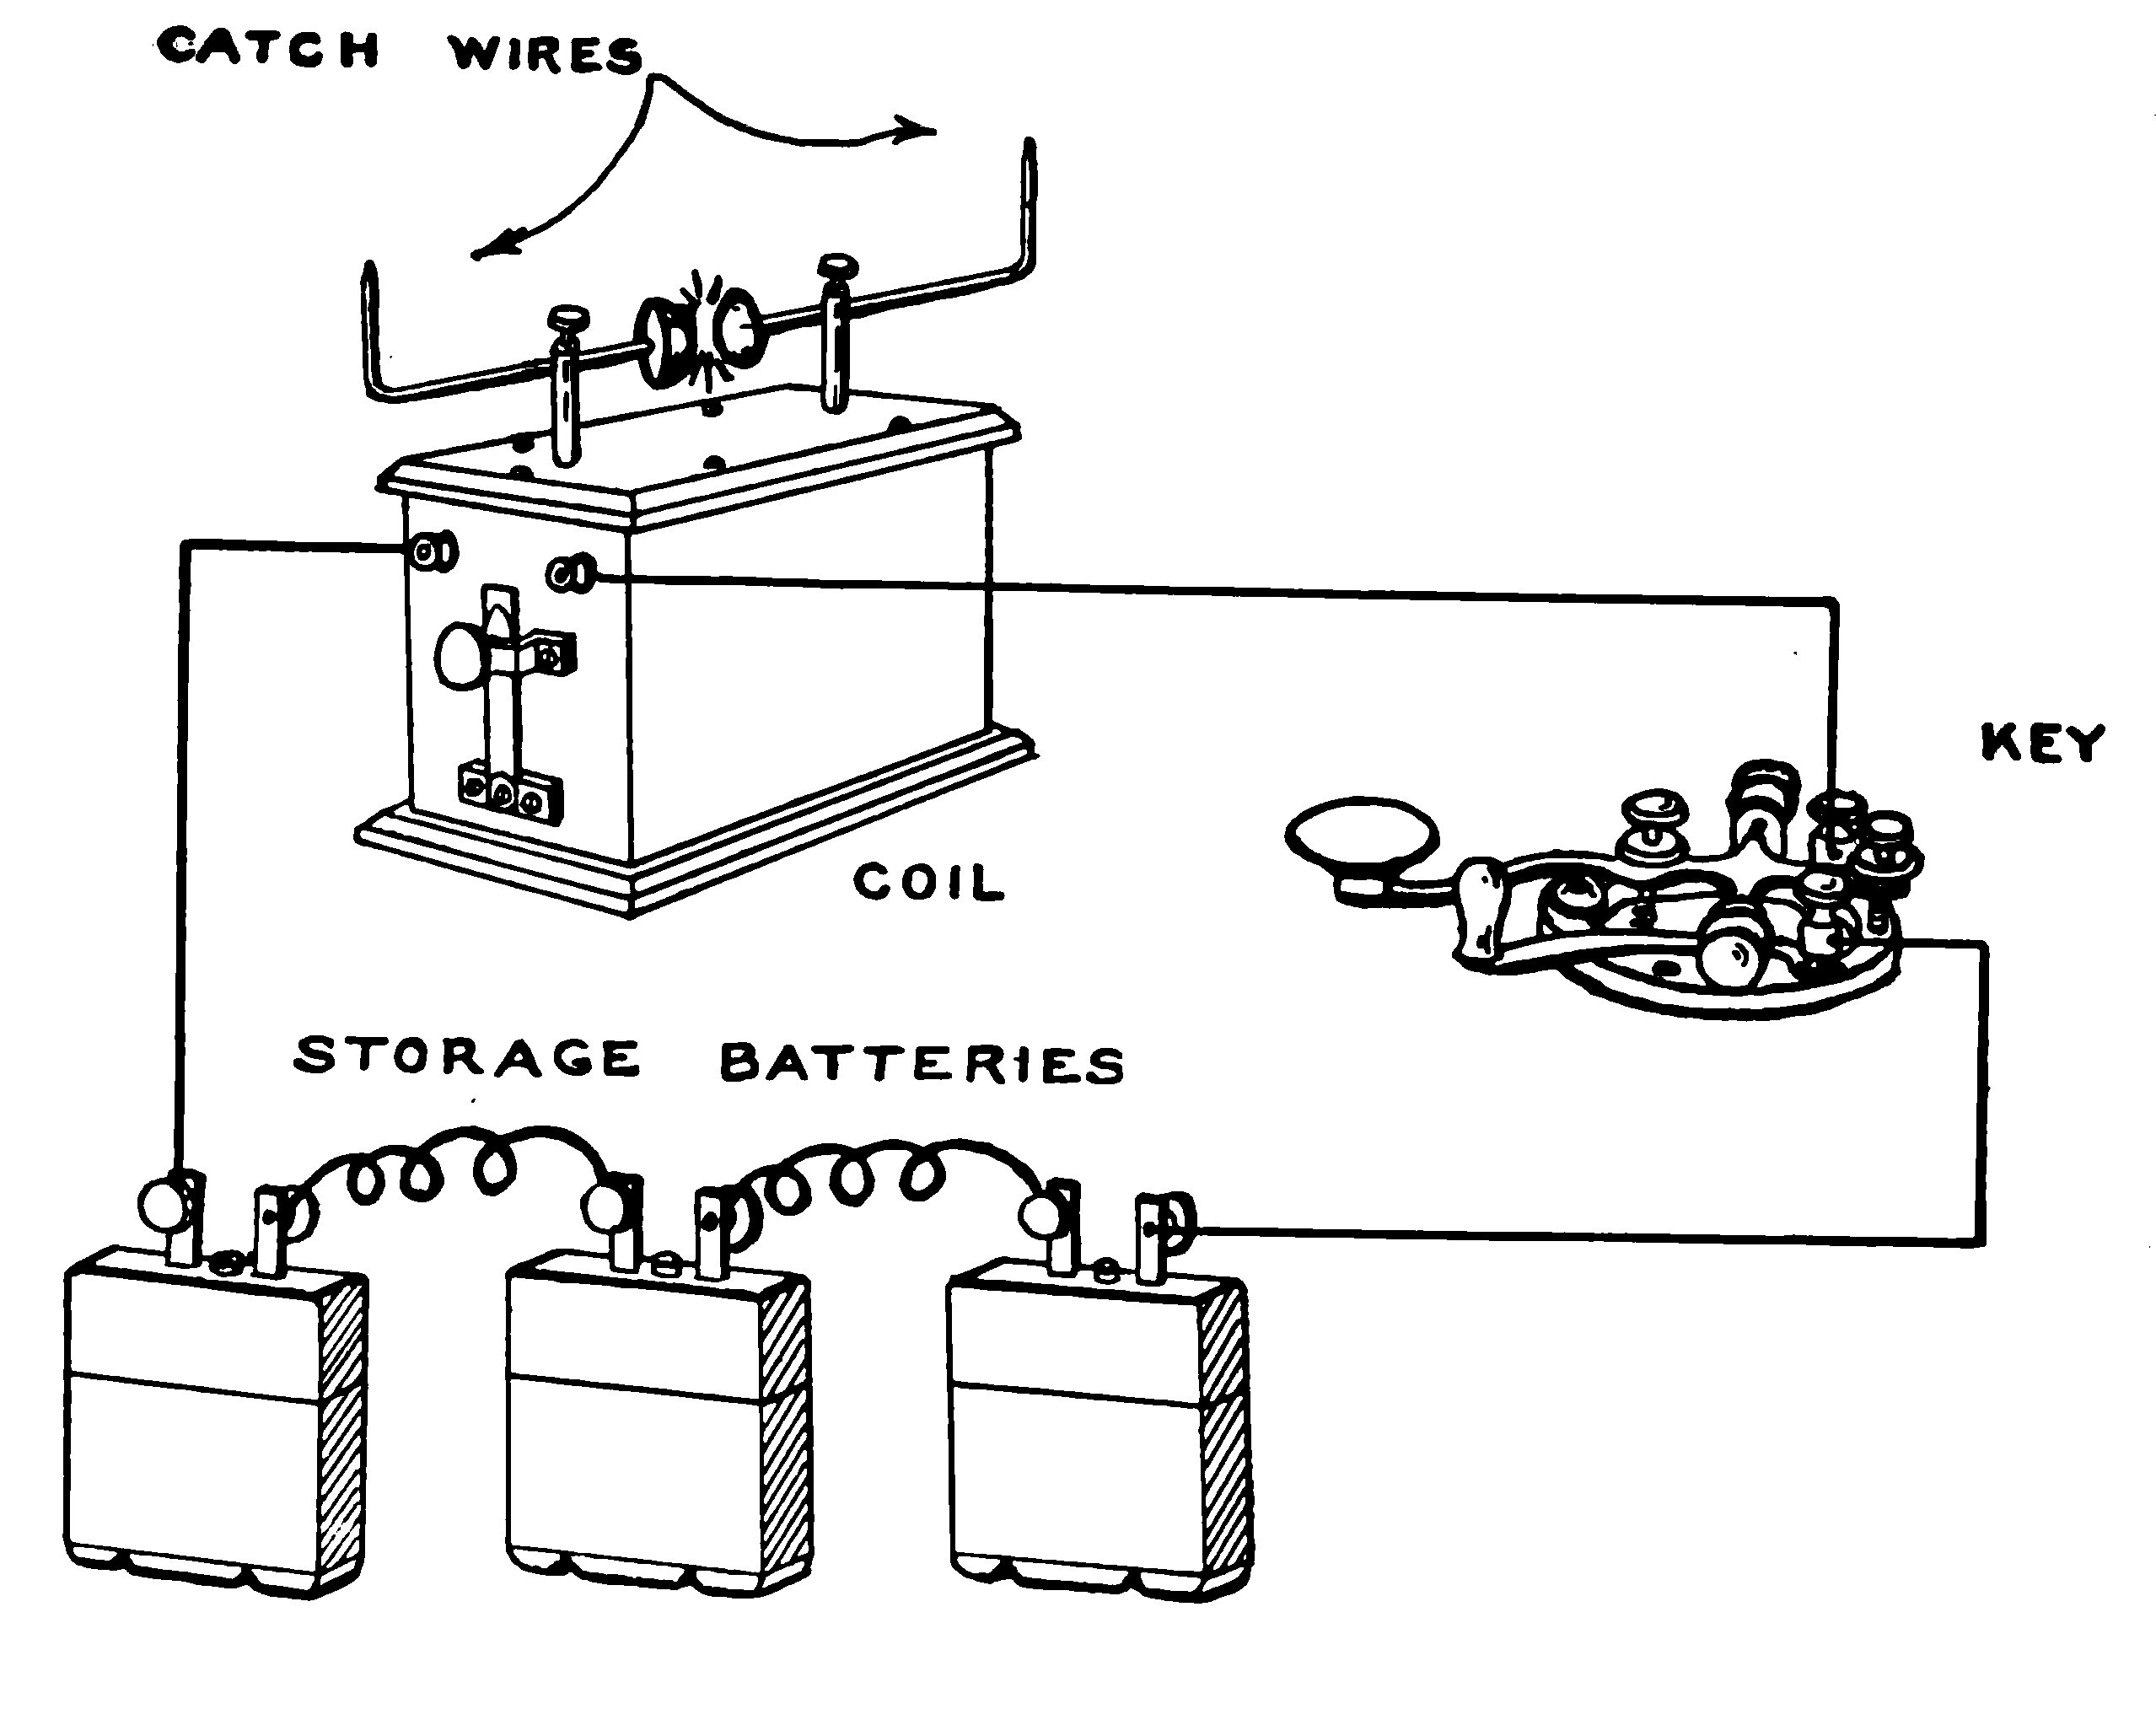 FIG. 167.—How the Transmitter is Connected.